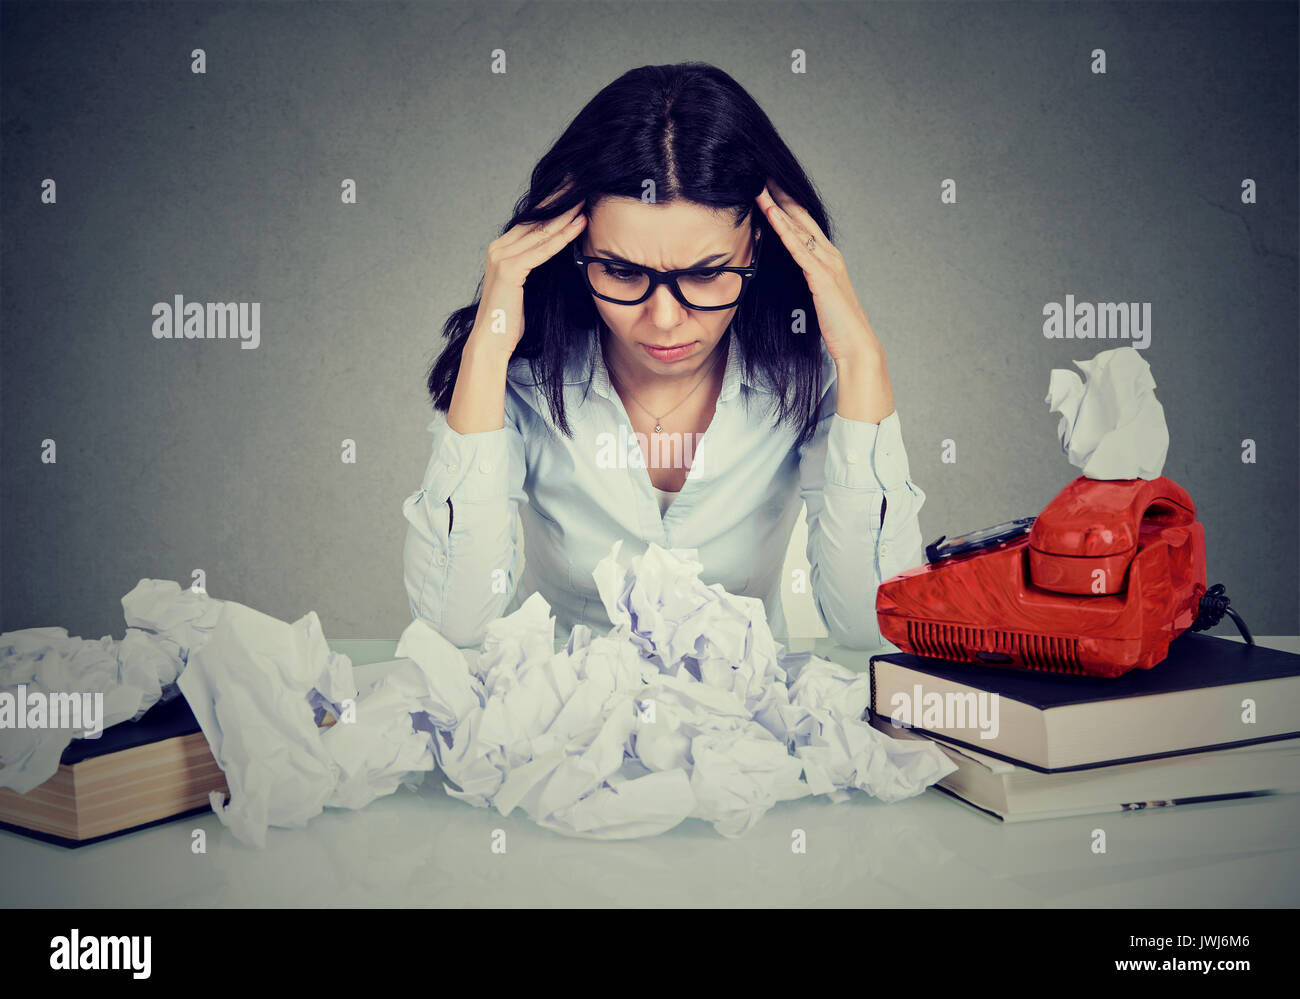 Too much work stressed woman sitting at her disorganized desk with books and many paper balls isolated on gray office wall background. Stock Photo